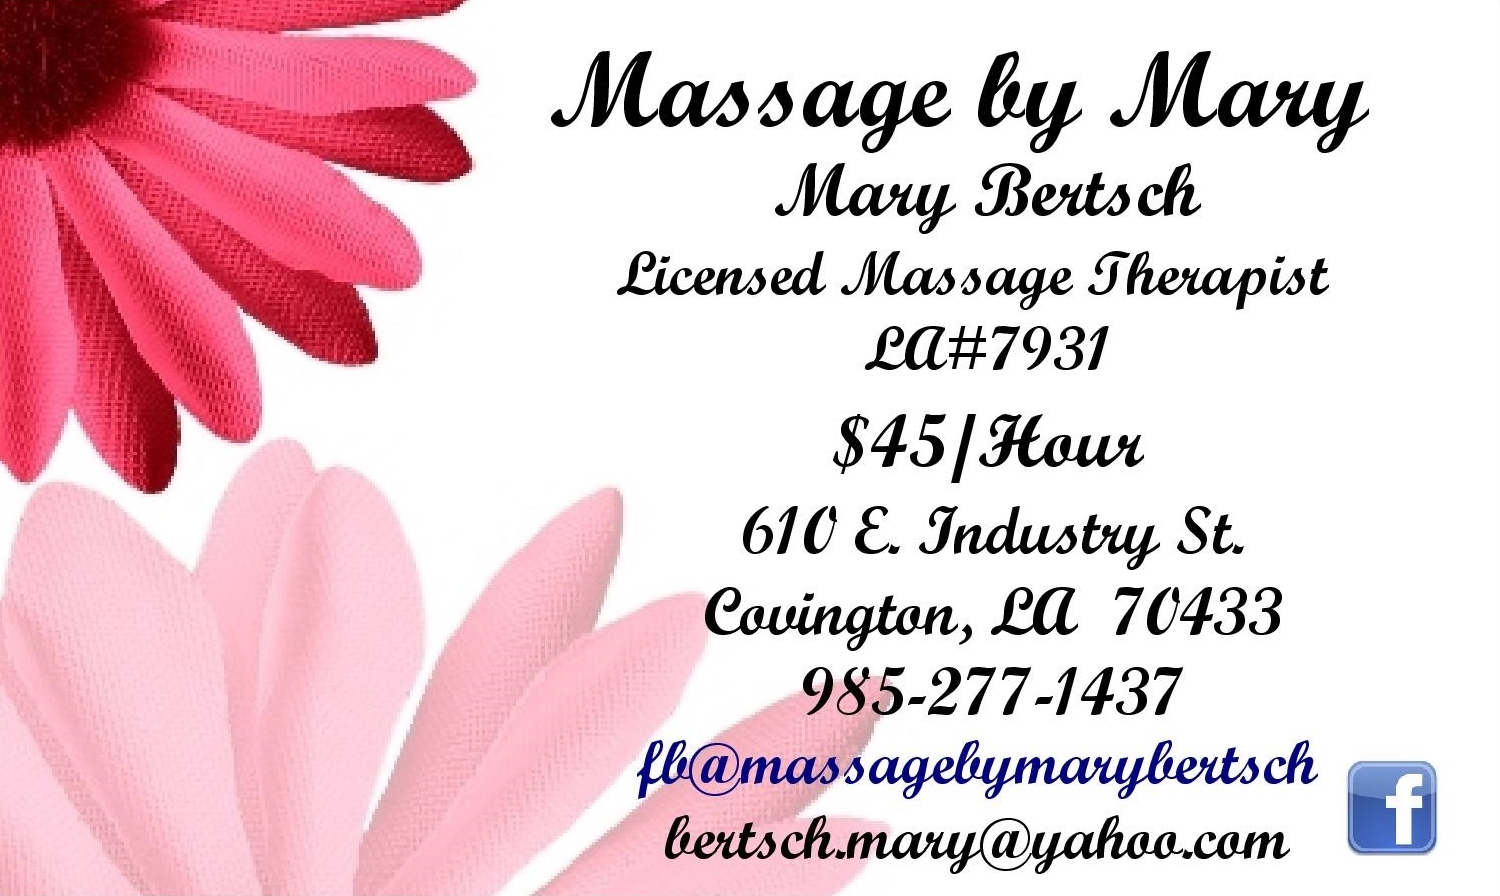 Introducing Massage by Mary